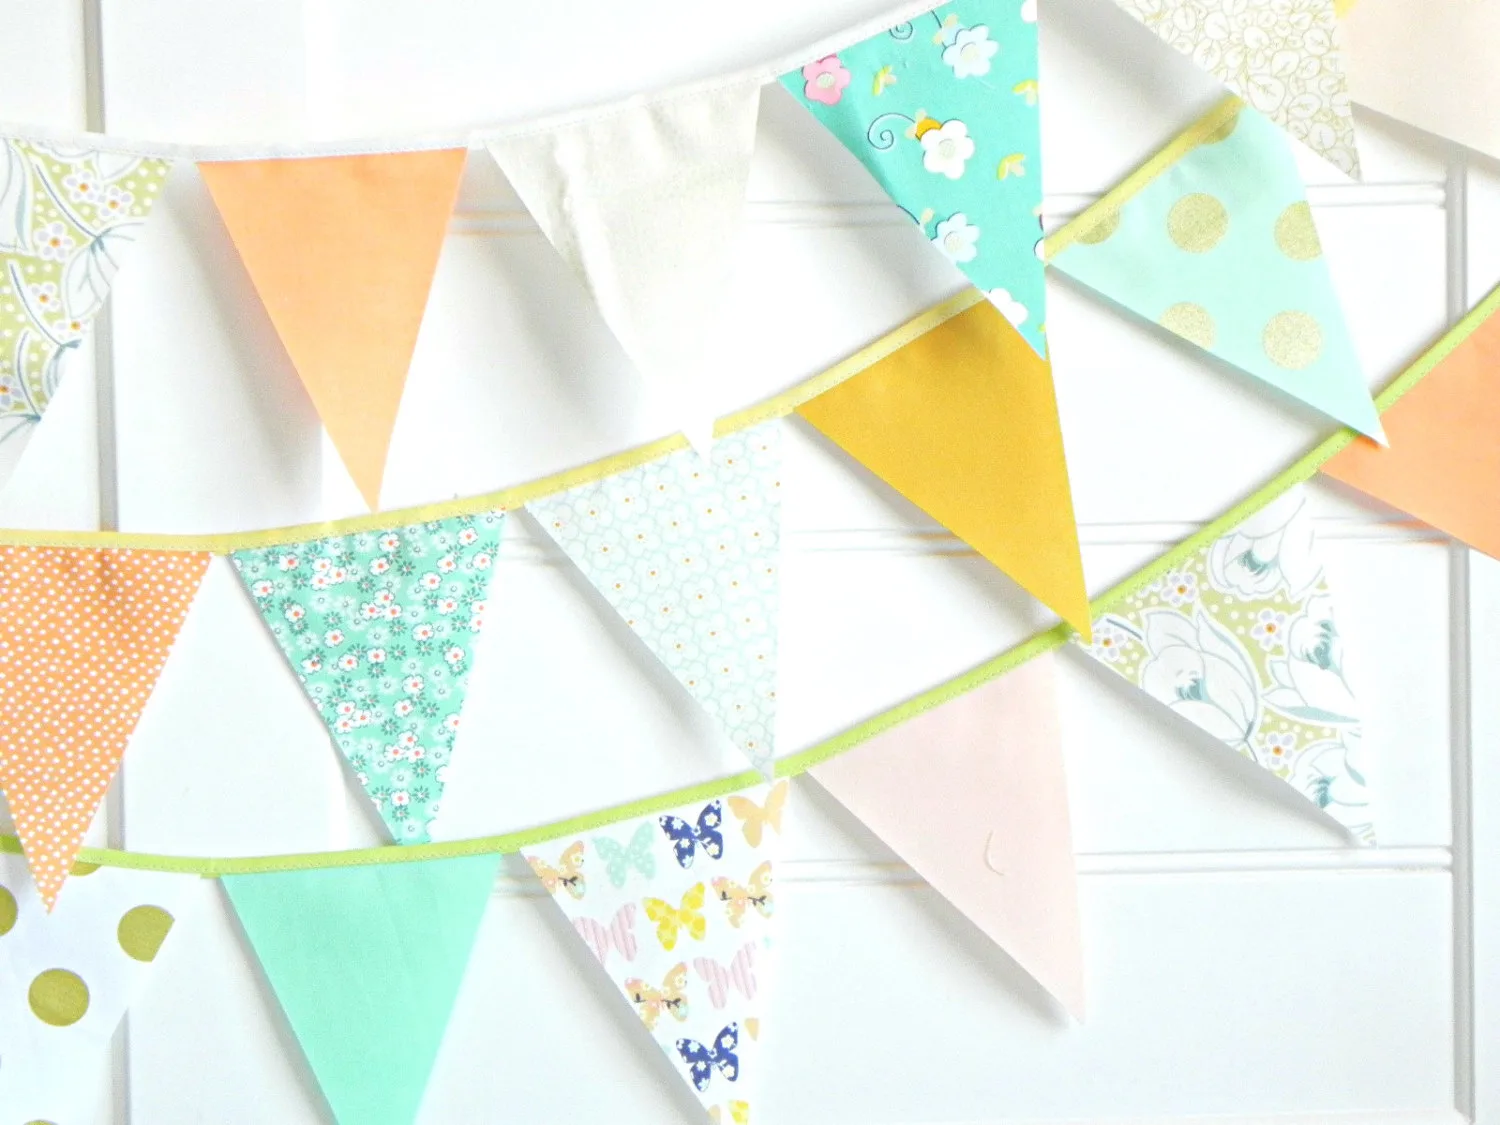 Fabric Bunting Garland from A Fete Beckons on Etsy